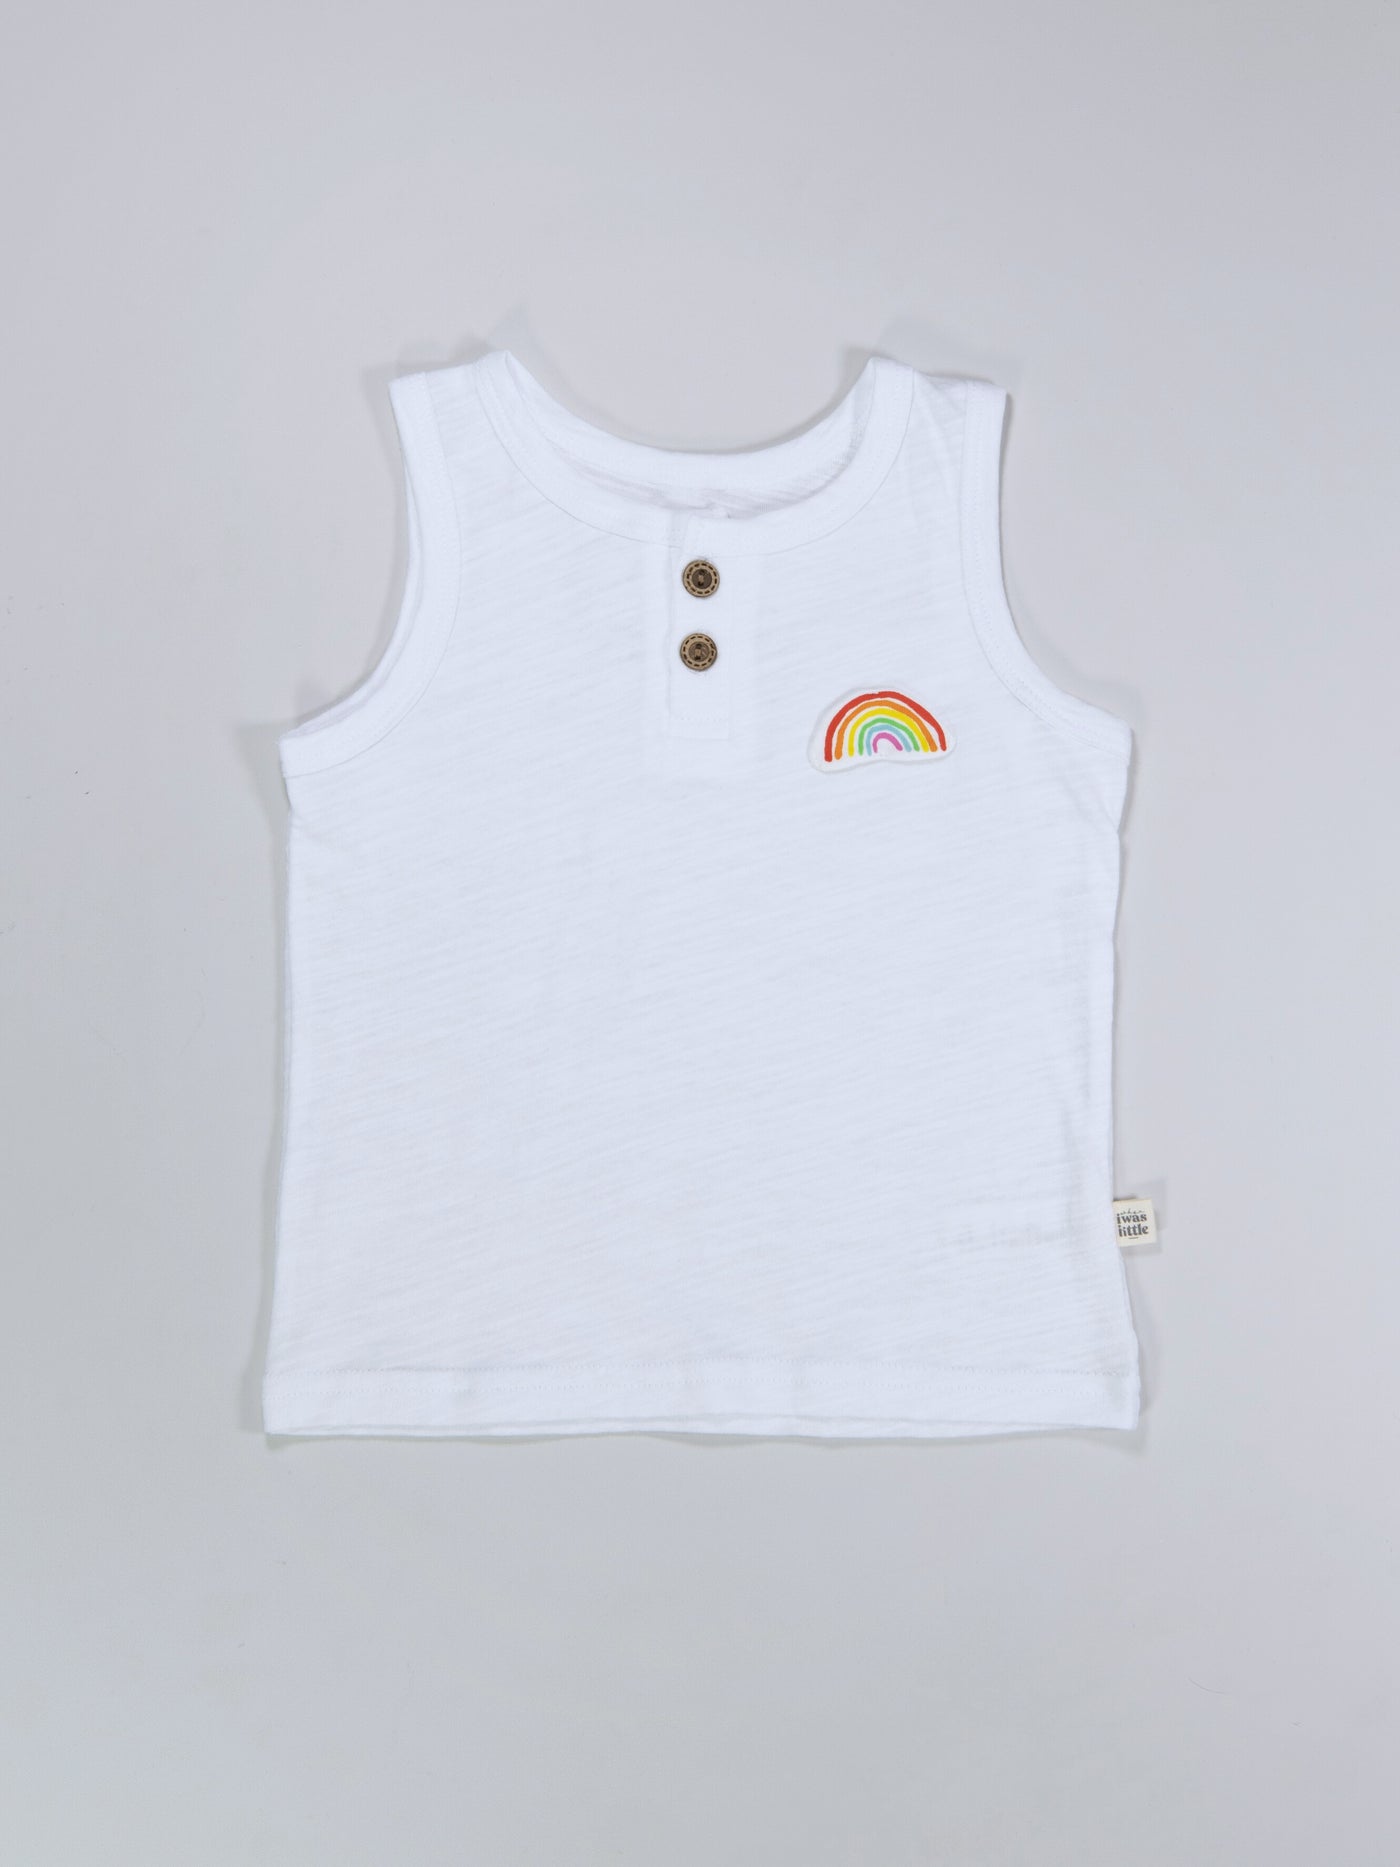 white sleeveless singlet top for kids, baby and toddlers